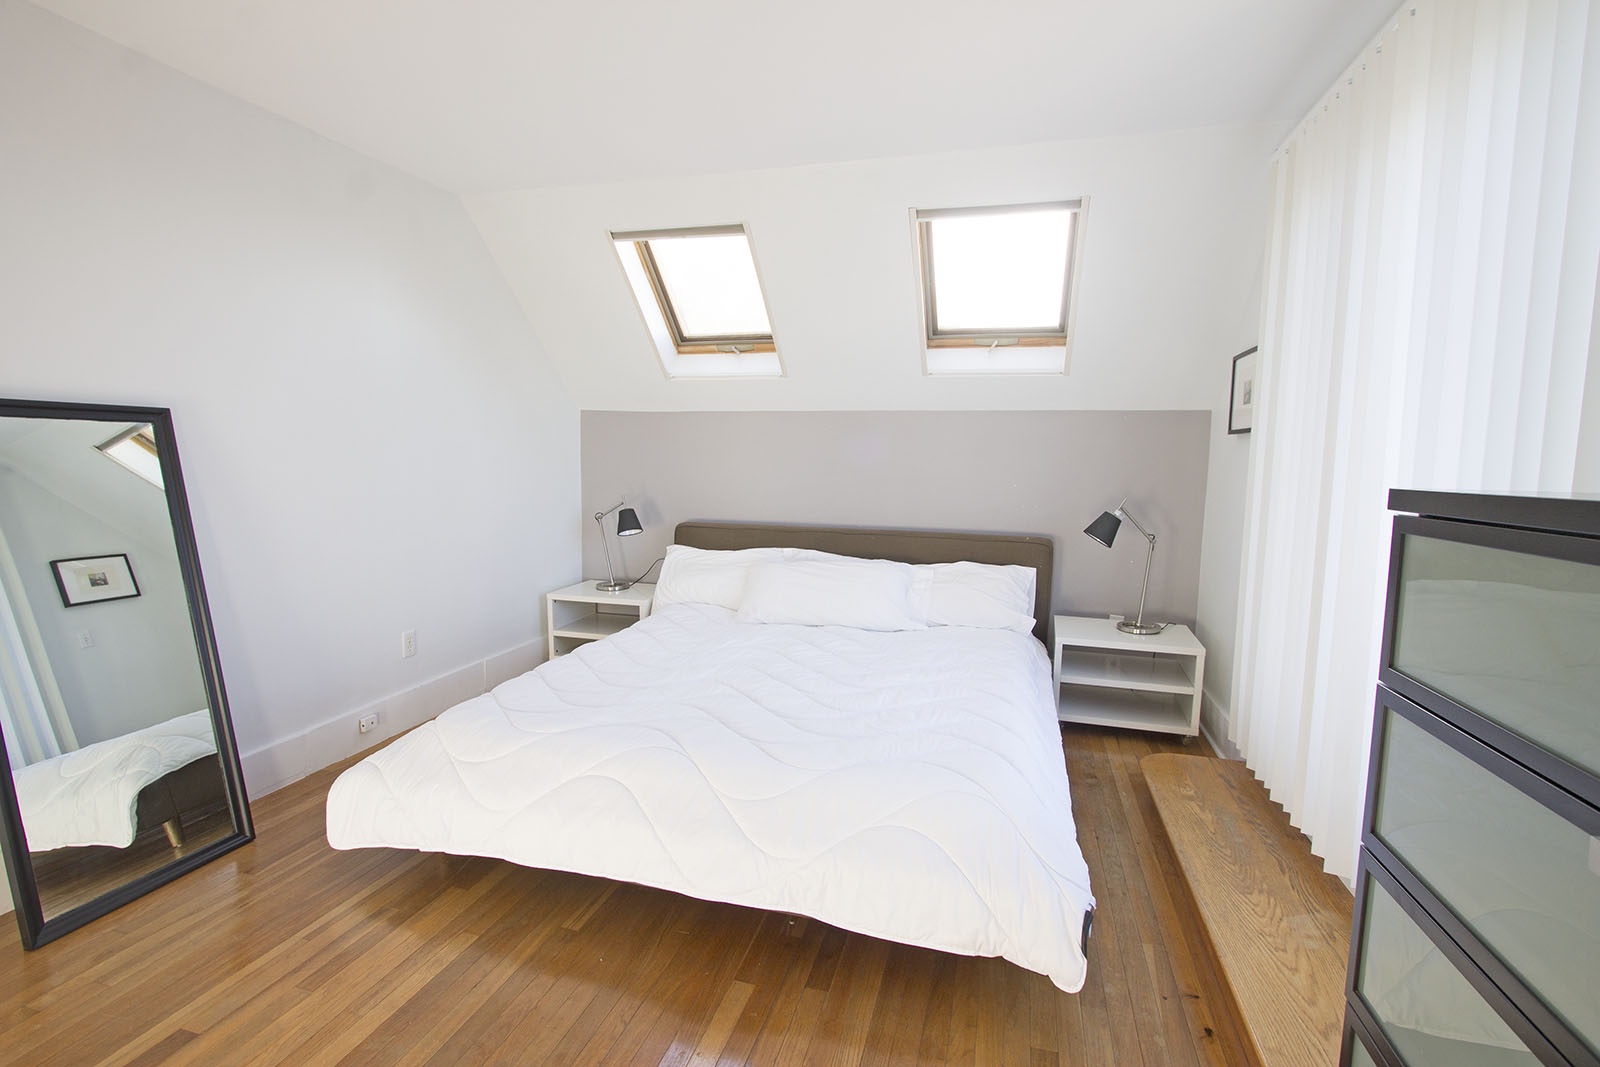 BR 1: Master bedroom with skylights and sliders to a balcony.